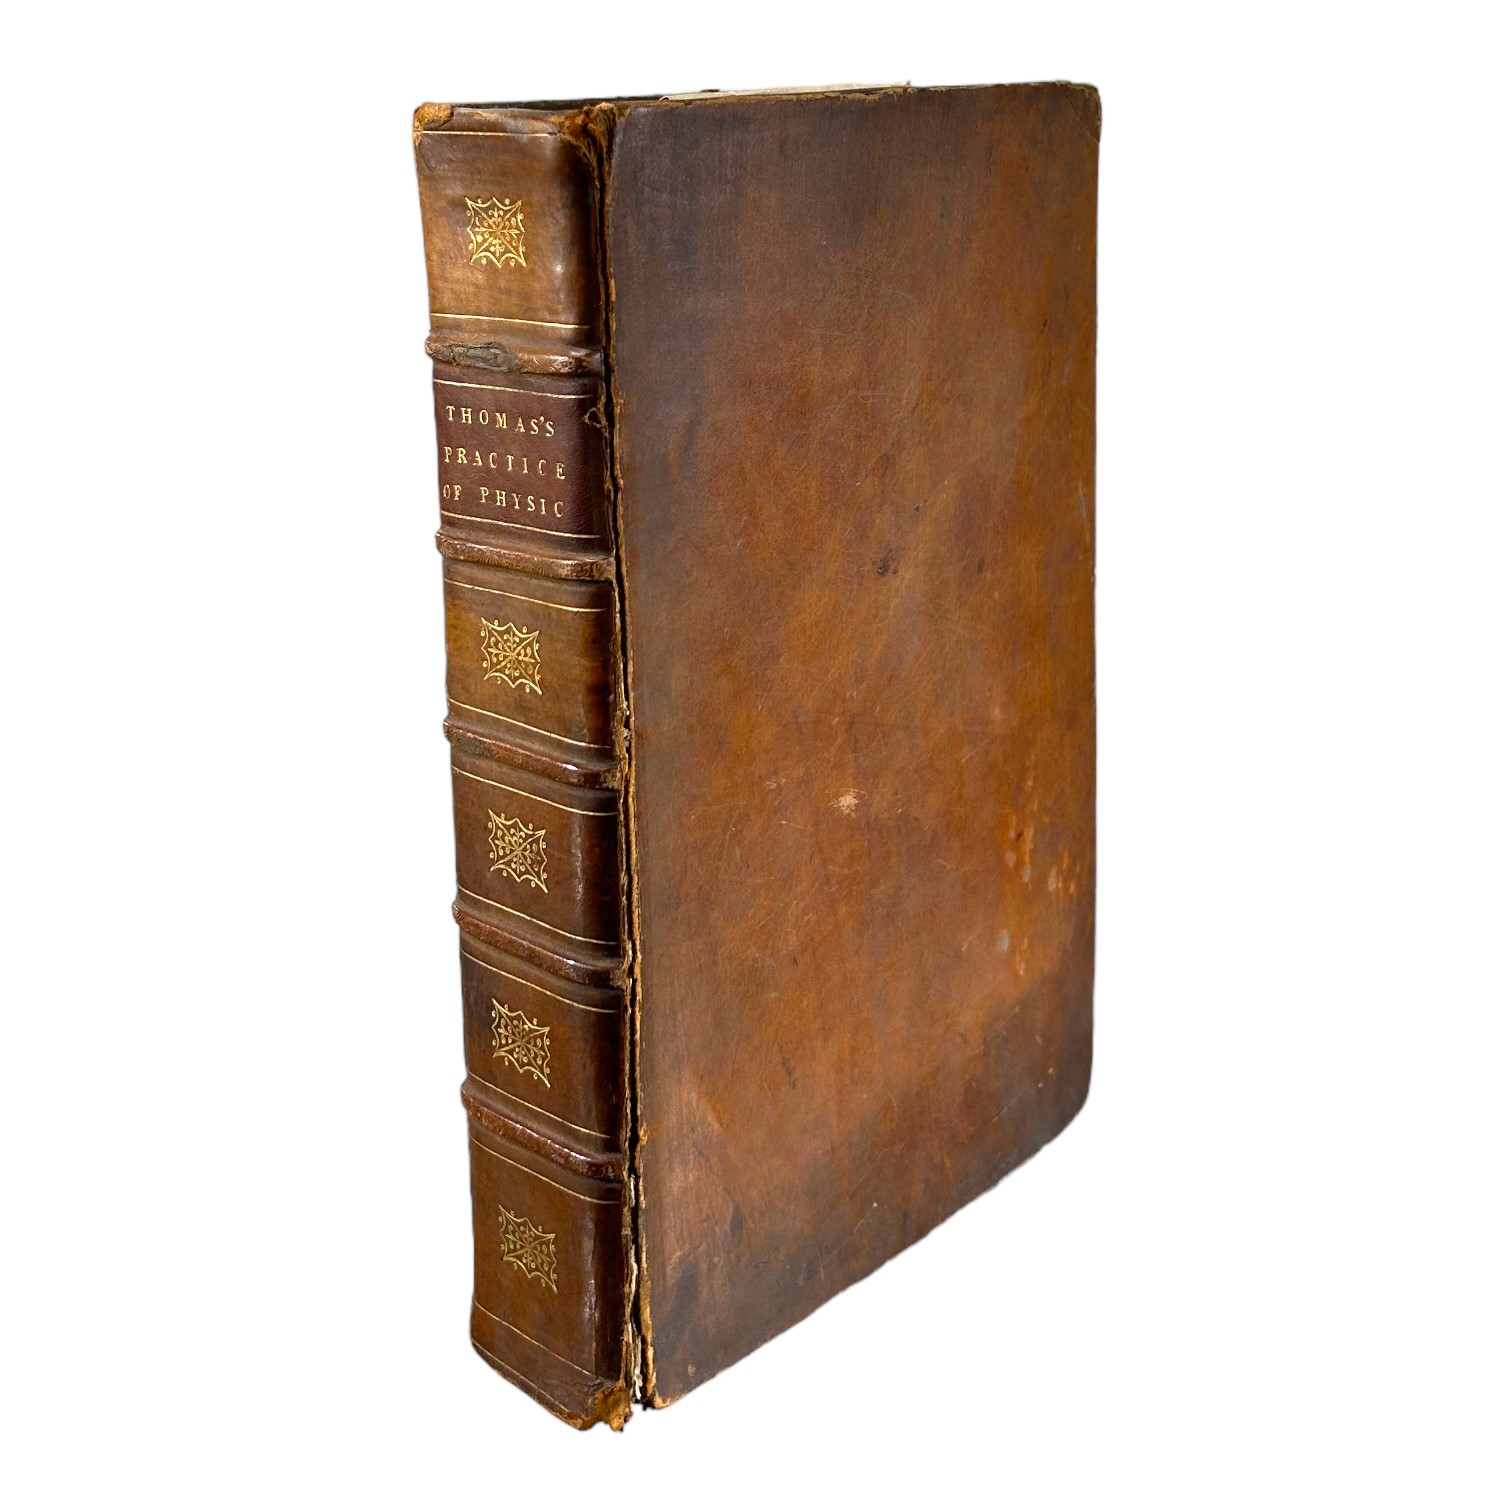 ROBERT THOMAS, M. D. EARLY 19TH CENTURY BOOK TITLED: THE MODERN PRACTICE OF PHYSIC, FOURTH